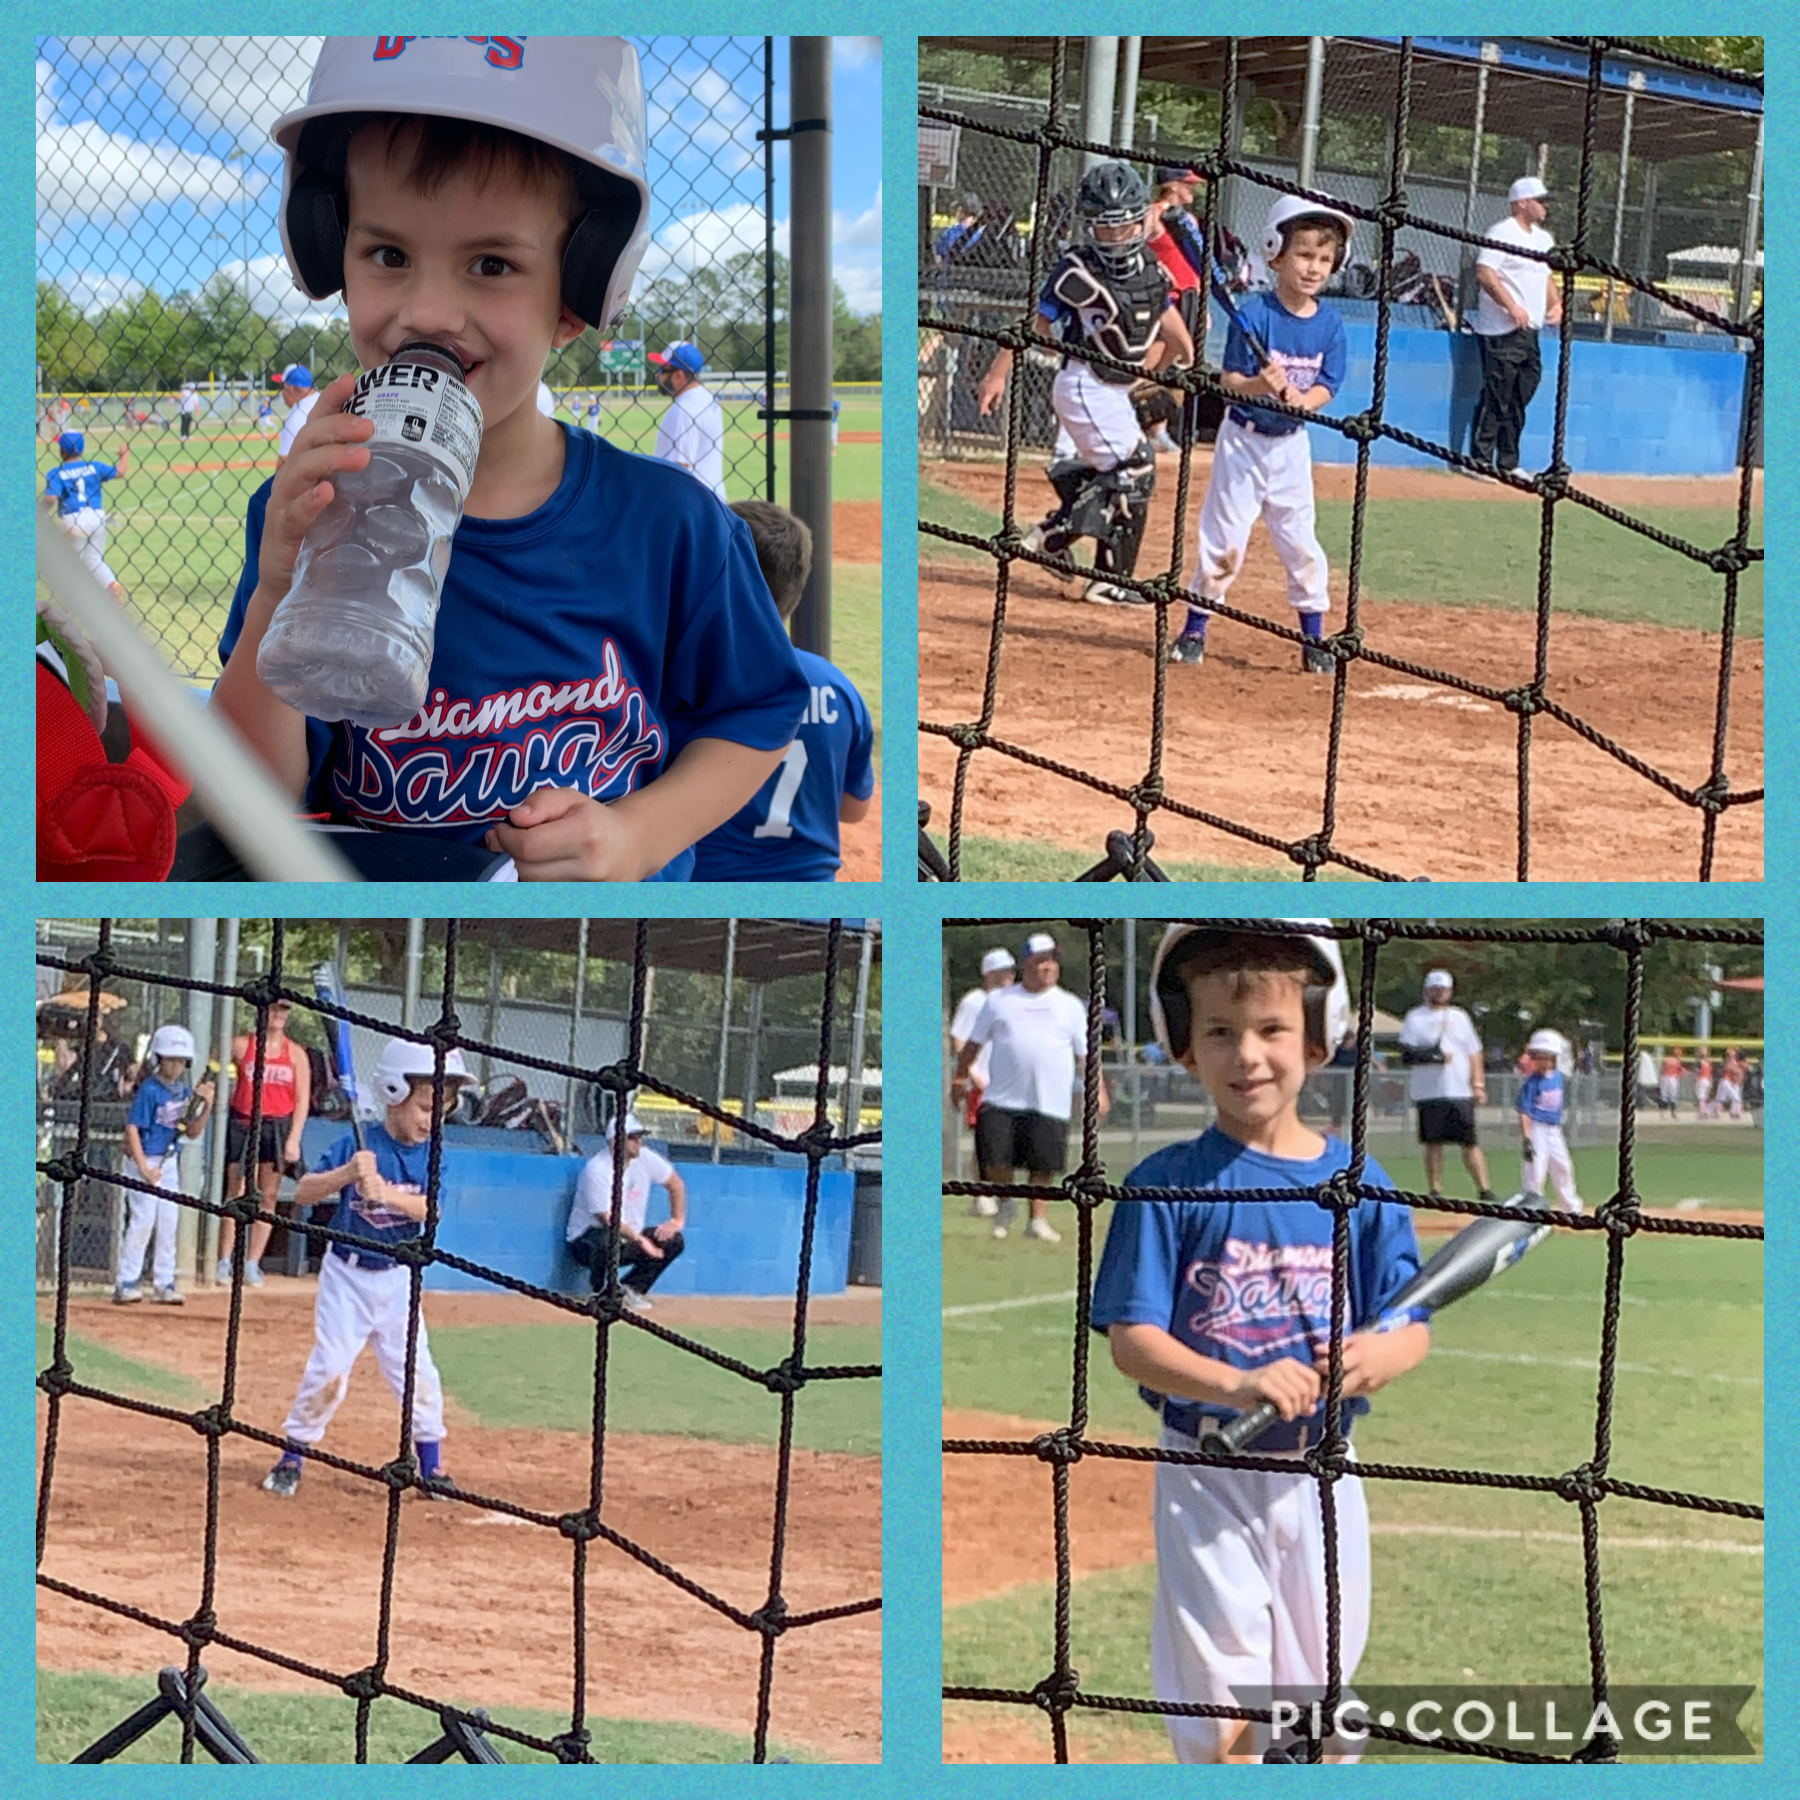 Sorry I wasn’t online a lot today my brother had a baseball game and he didn’t win but he did really good and so did his team. He has another game tomorrow so please pray he wins😁